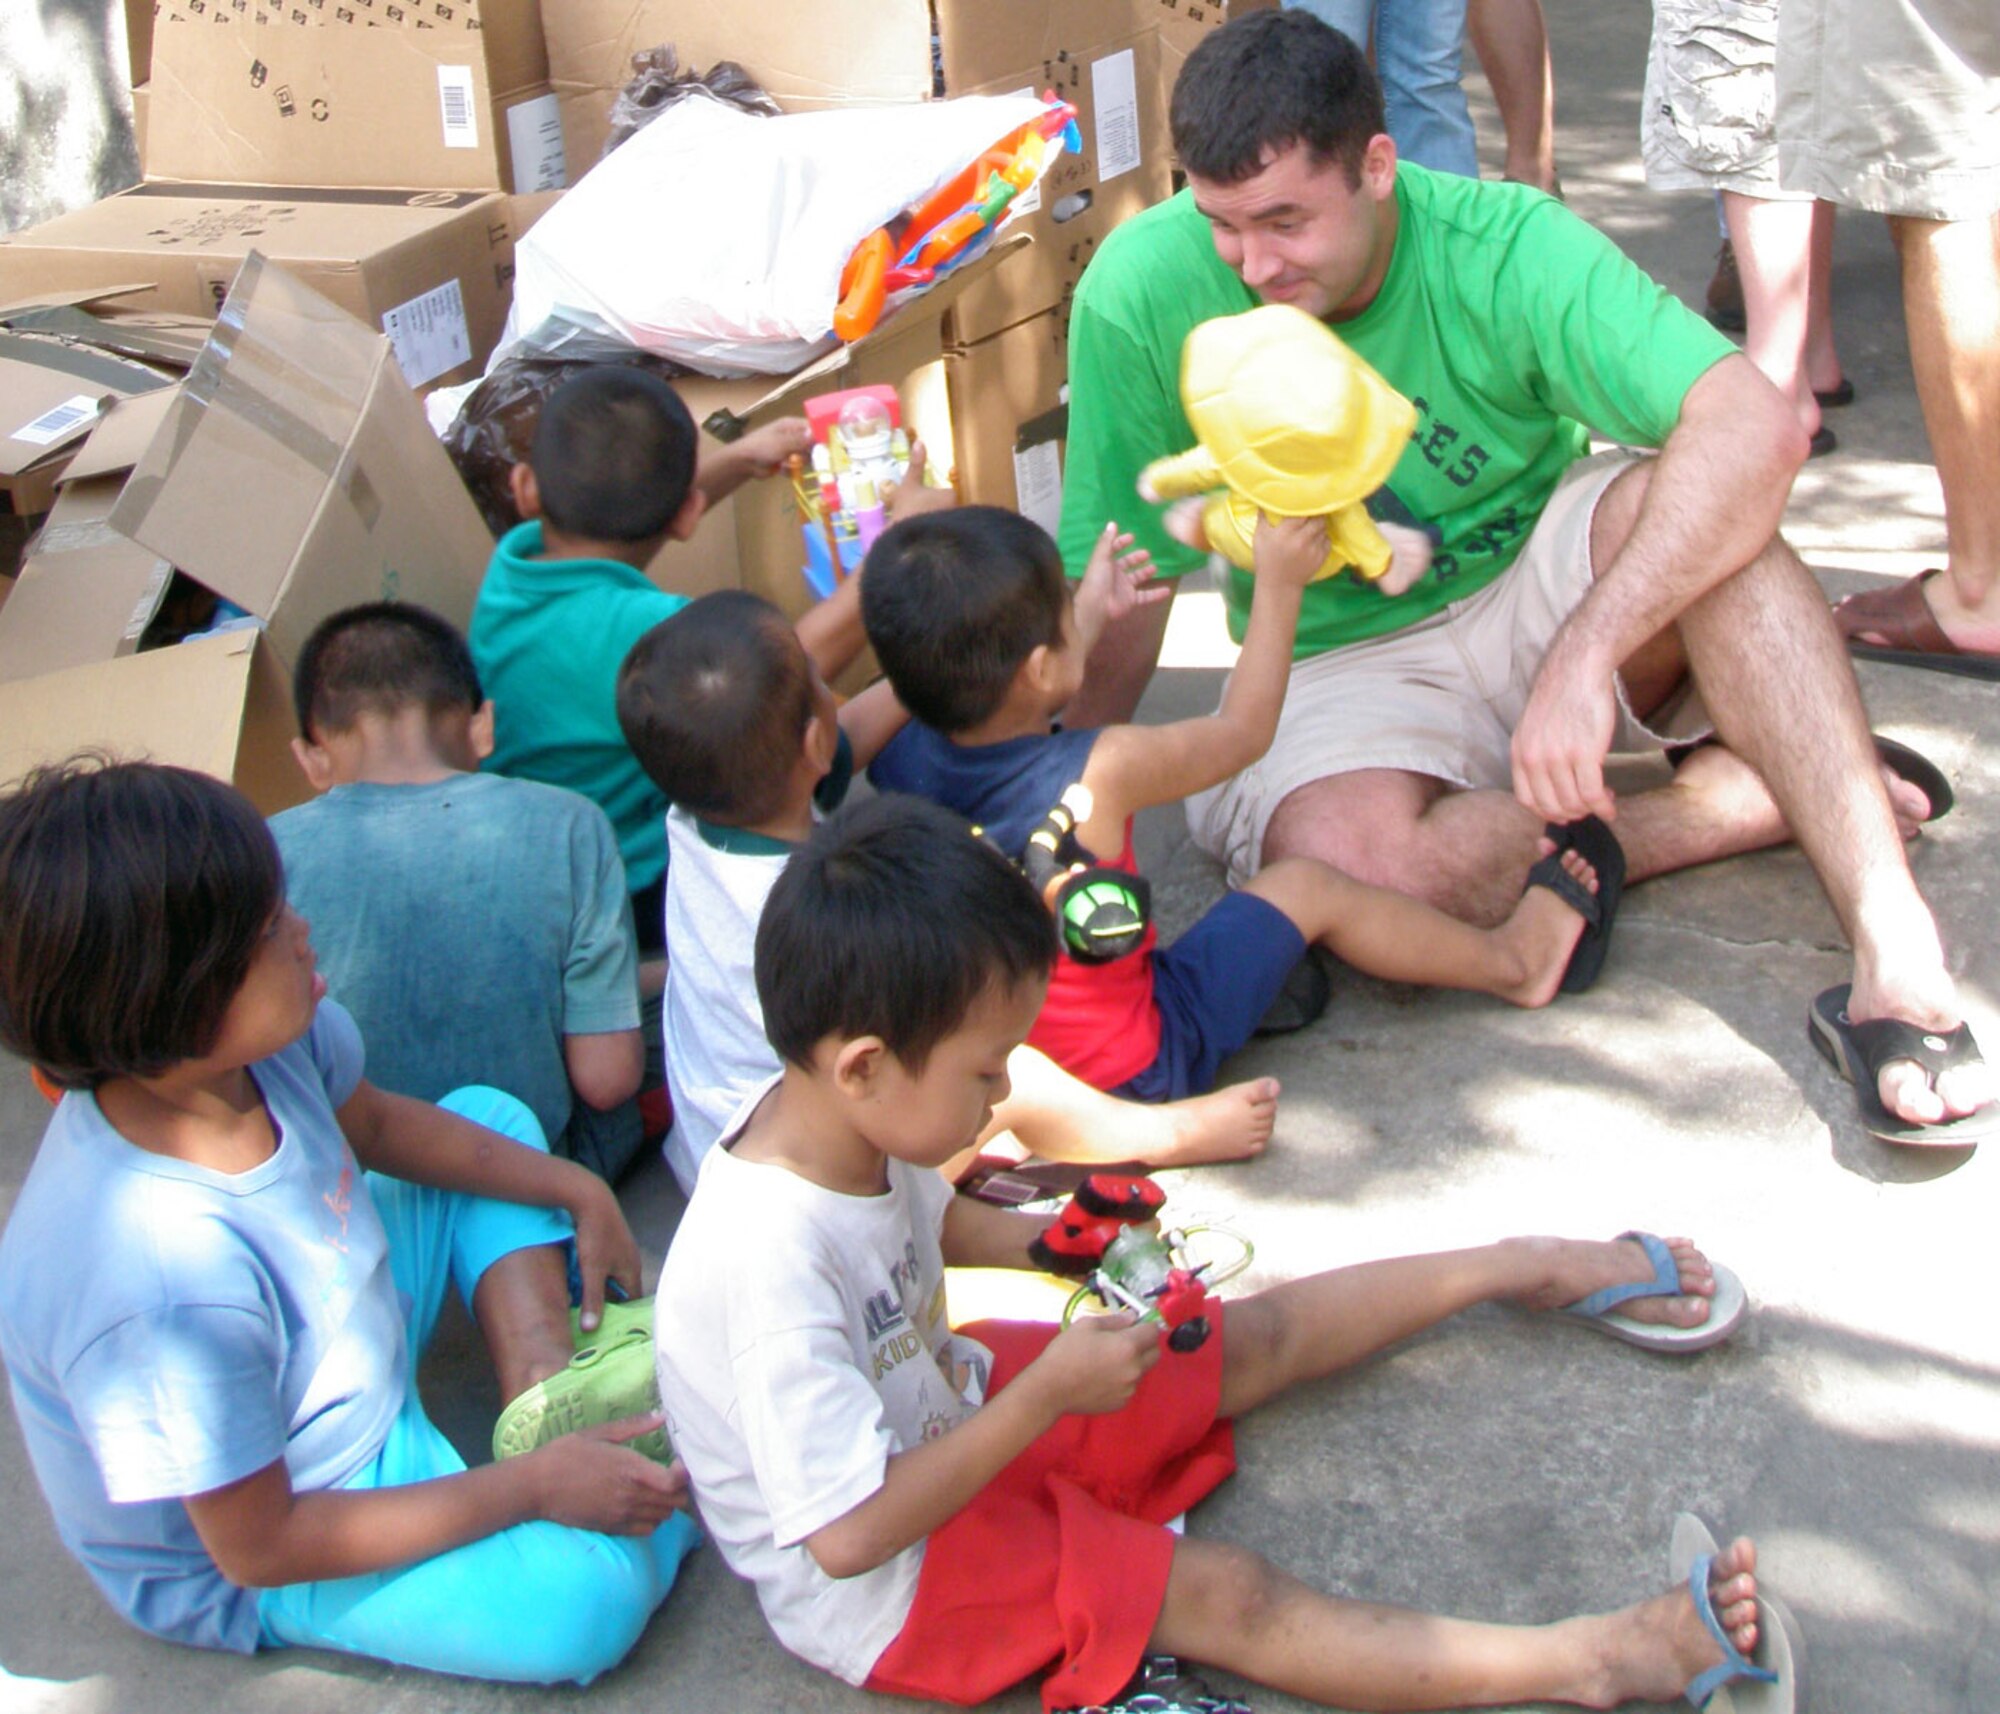 Capt. Zak Blom listens to children after handing out toys to children Jan. 19 at the Duyan ni Maria orphanage in Angeles City, Pampanga in the Philippines. The captain and members of the 17th Special Operations Squadron, 353rd Operations Support Squadron and 25th Intelligence Squadron Det. 3 stopped by the orphanage and single mothers home with boxes of clothing, shoes, toys, books and school supplies. Captain Blom is a 17th SOS pilot. (Courtesy photo) 
